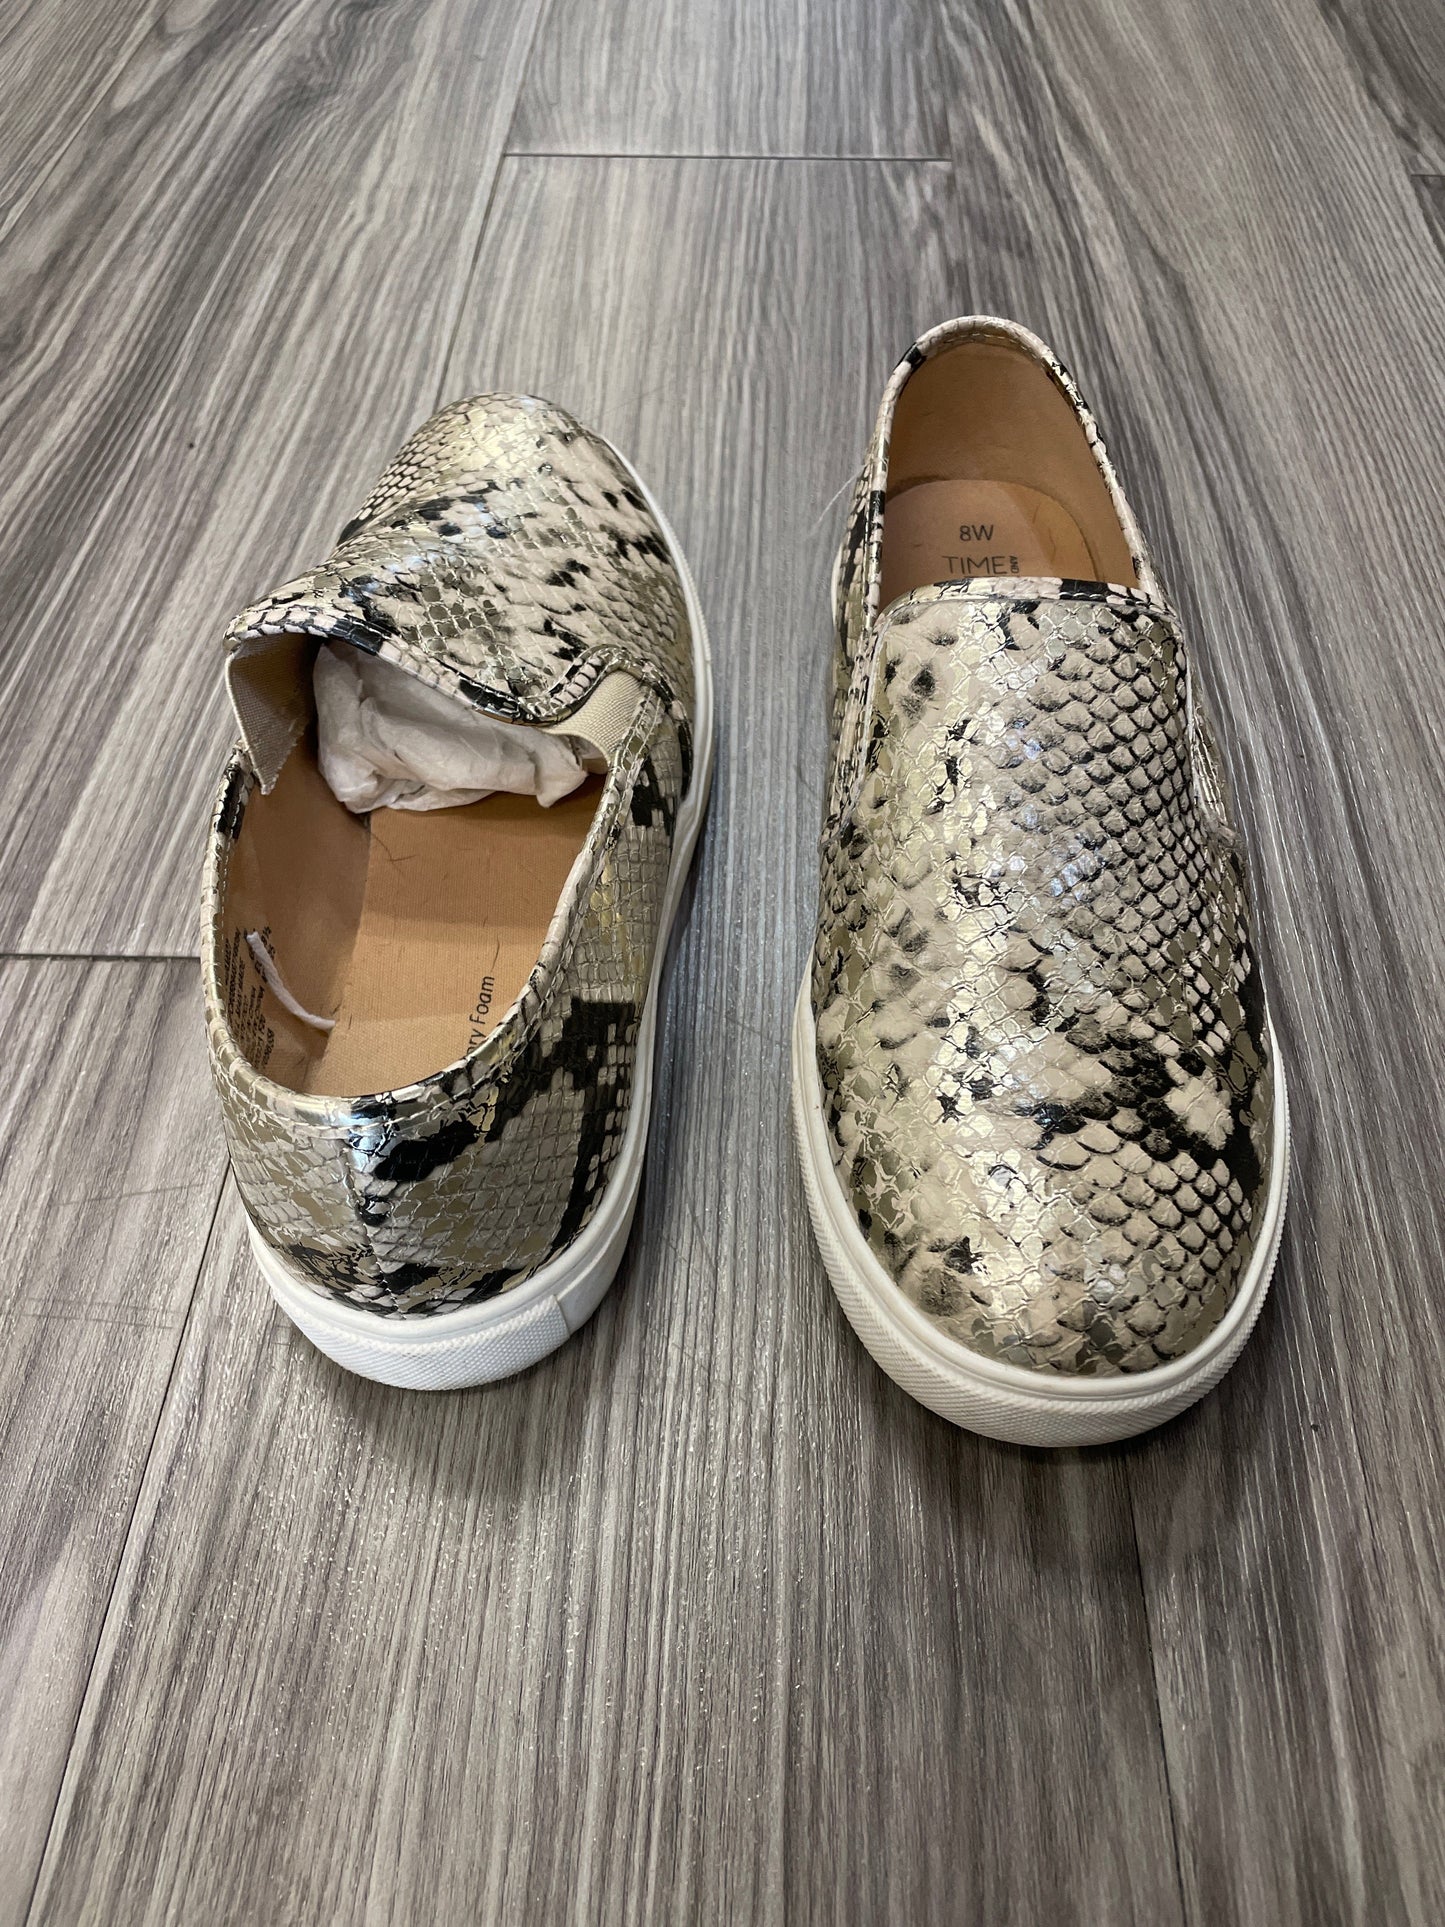 Animal Print Shoes Flats Time And Tru, Size 8